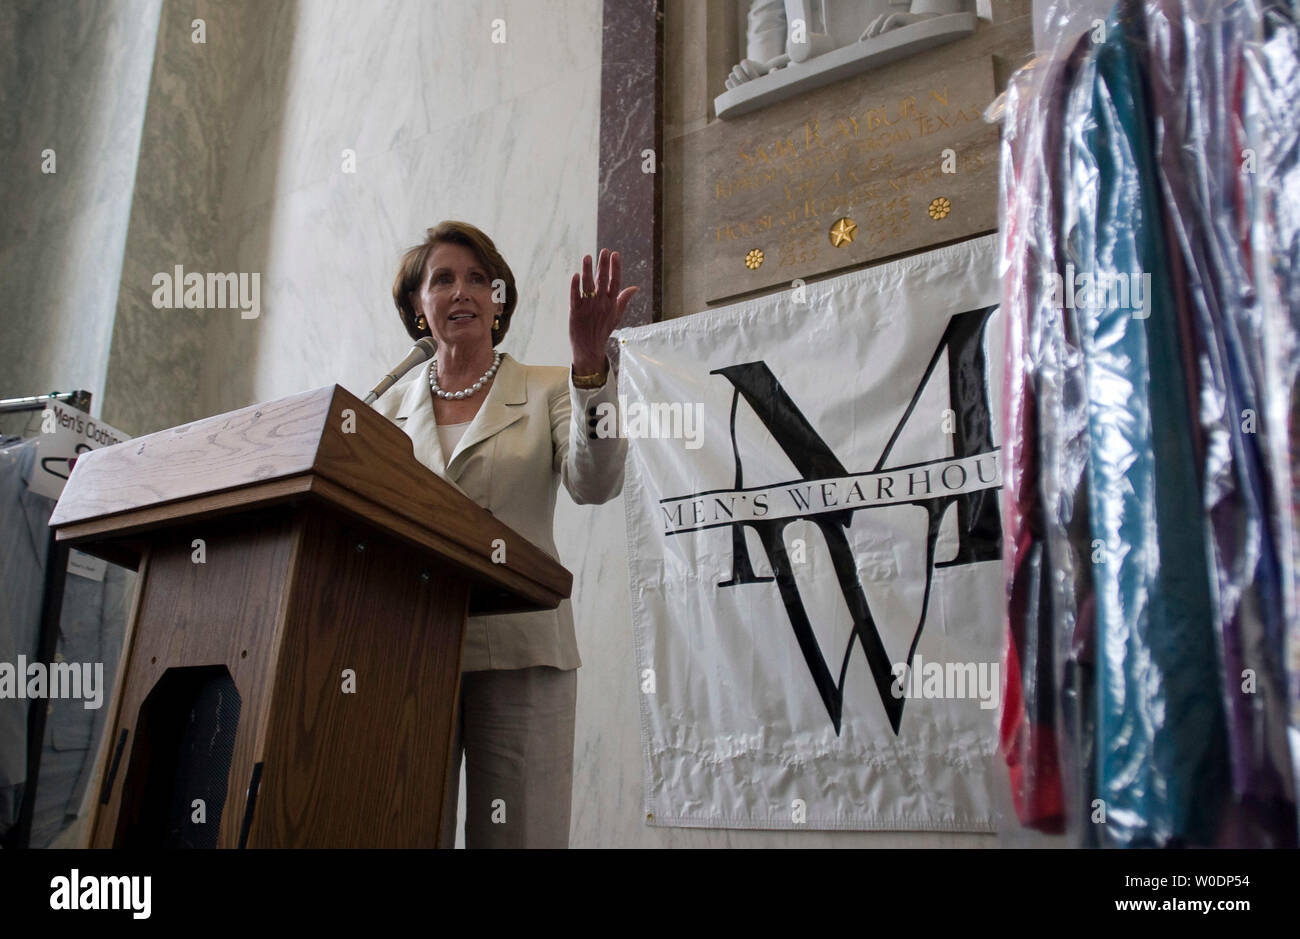 Speaker of the House Nancy Pelosi (D-CA) speaks at the 'Capitol PurSuit' event on Capitol Hill in Washington on June 27, 2007. Lobbyists and members of Congress donated suits and dress clothes to families in need. (UPI Photo/Dominic Bracco II) Stock Photo